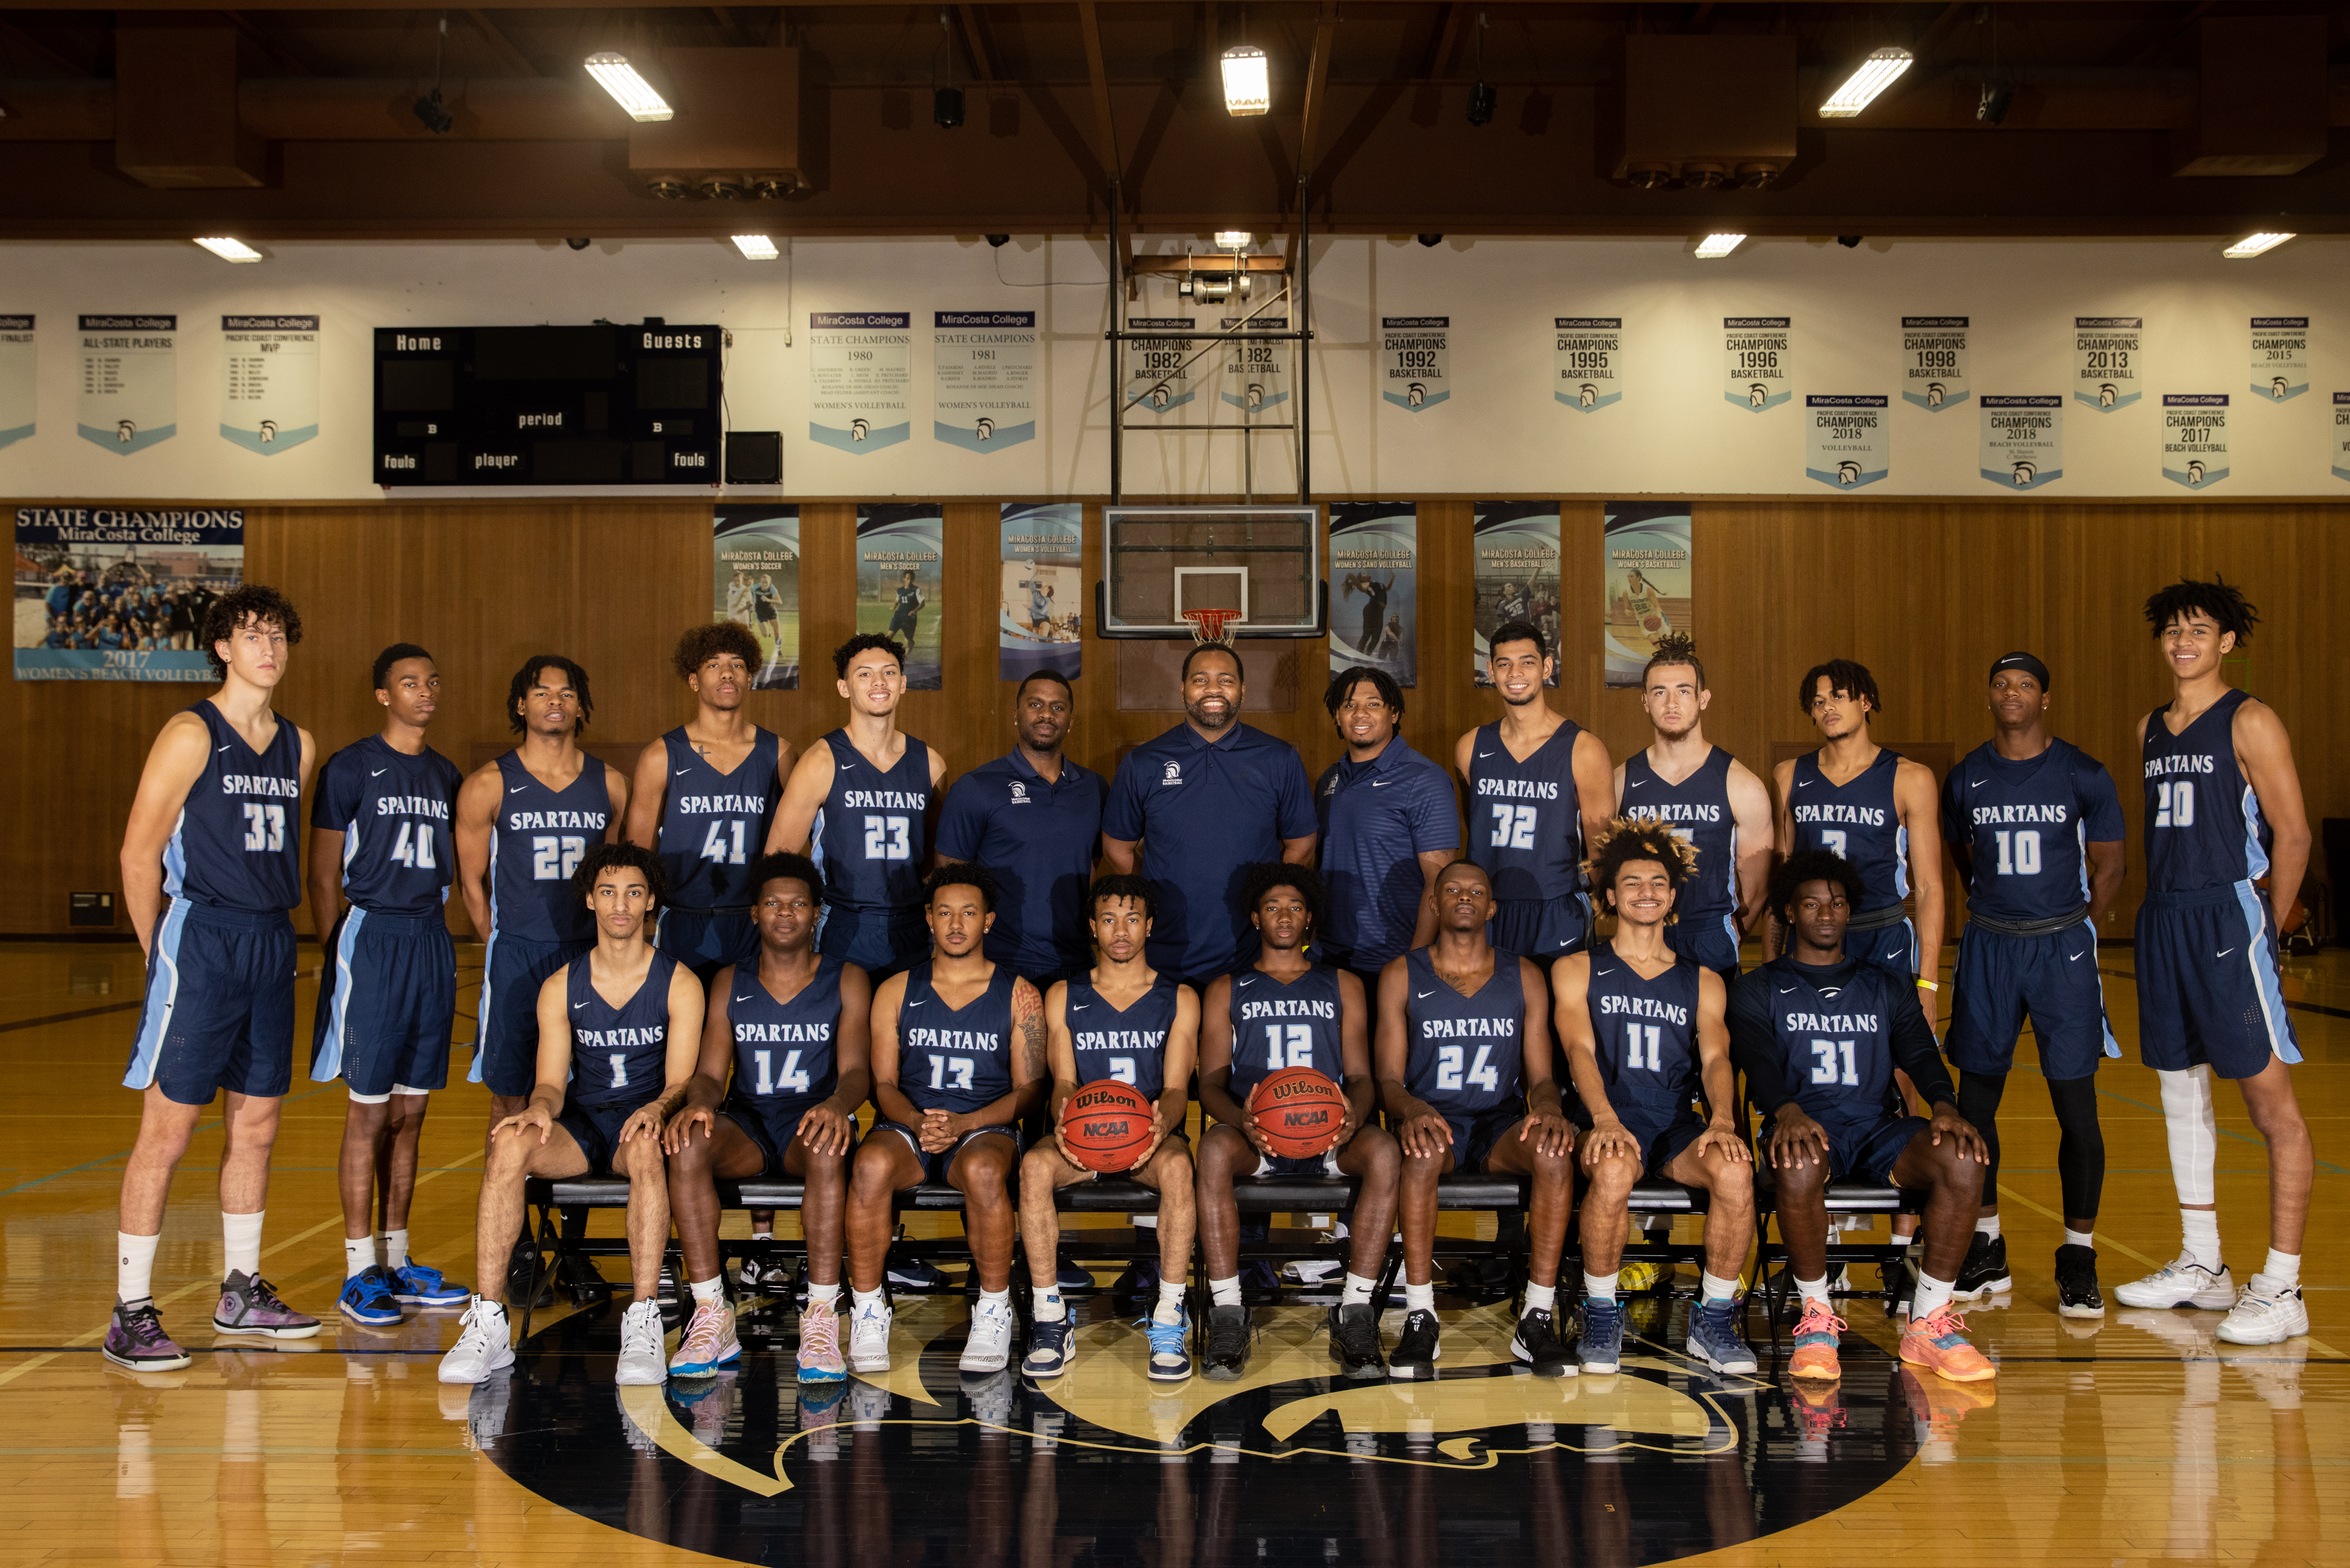 Men's Basketball team picture with coaches.